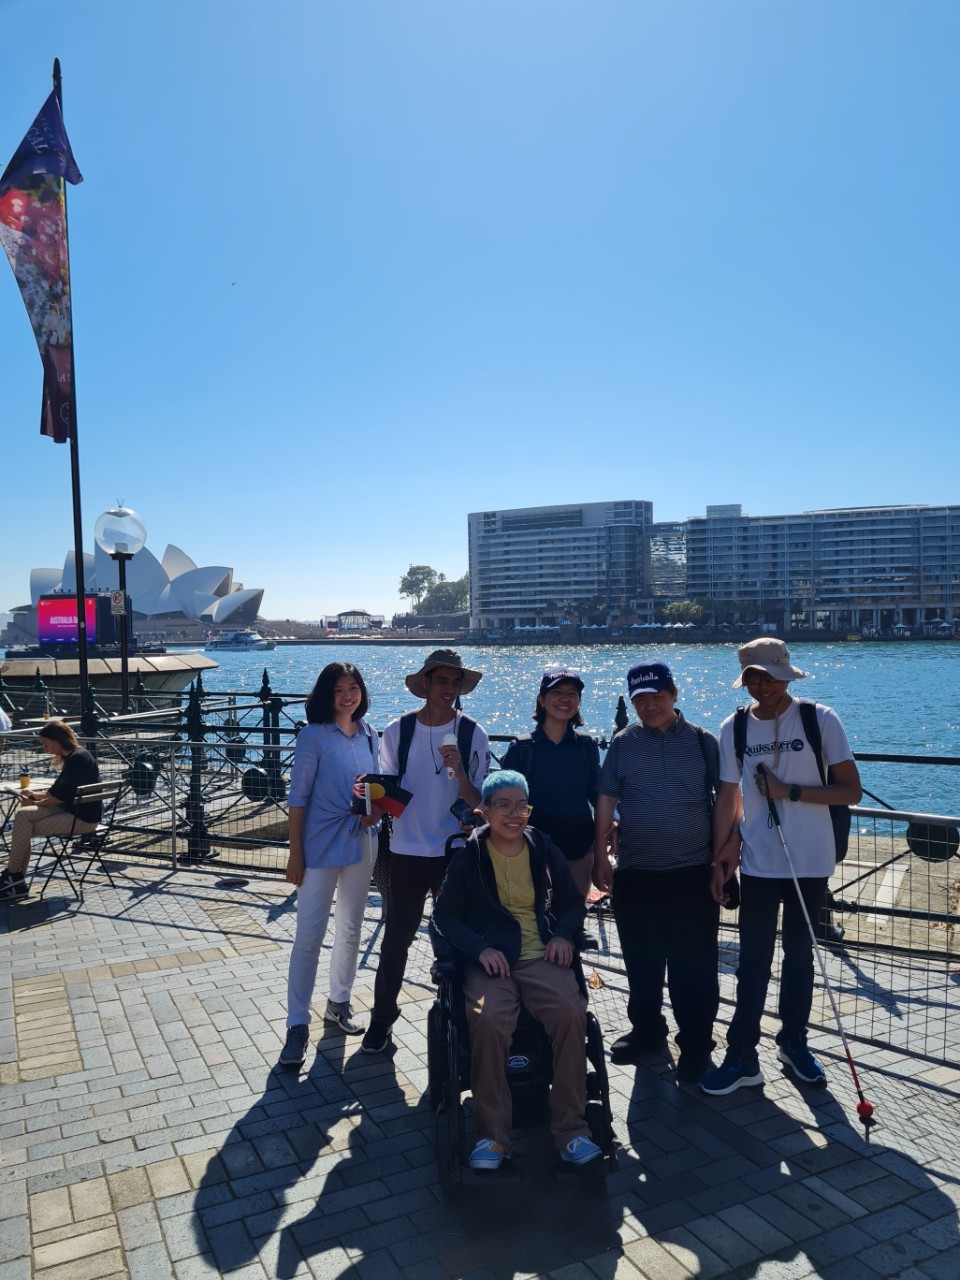 Course participants with the Sydney Opera House in the background